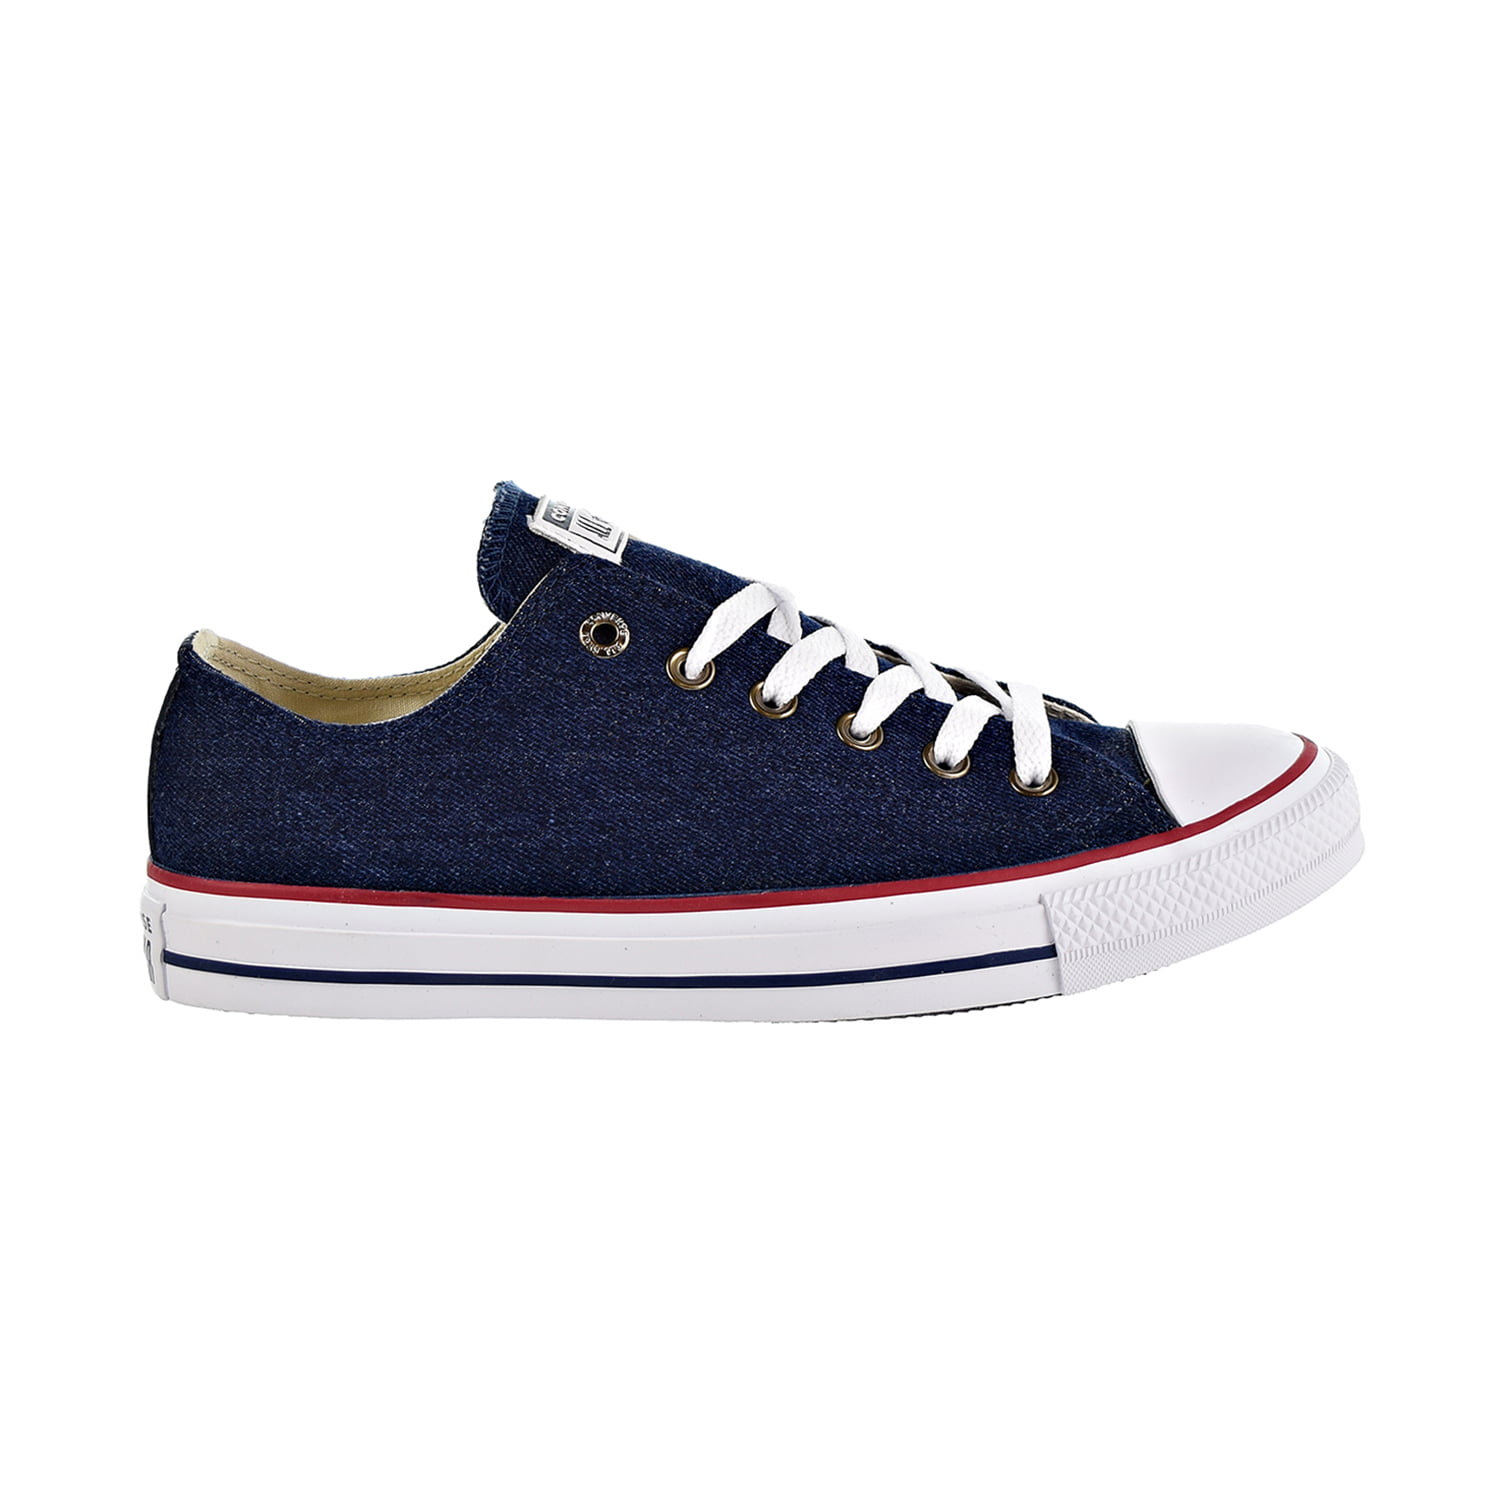 Chuck Taylor All Star Ox Unisex Shoes Blue-Natural 161489f -